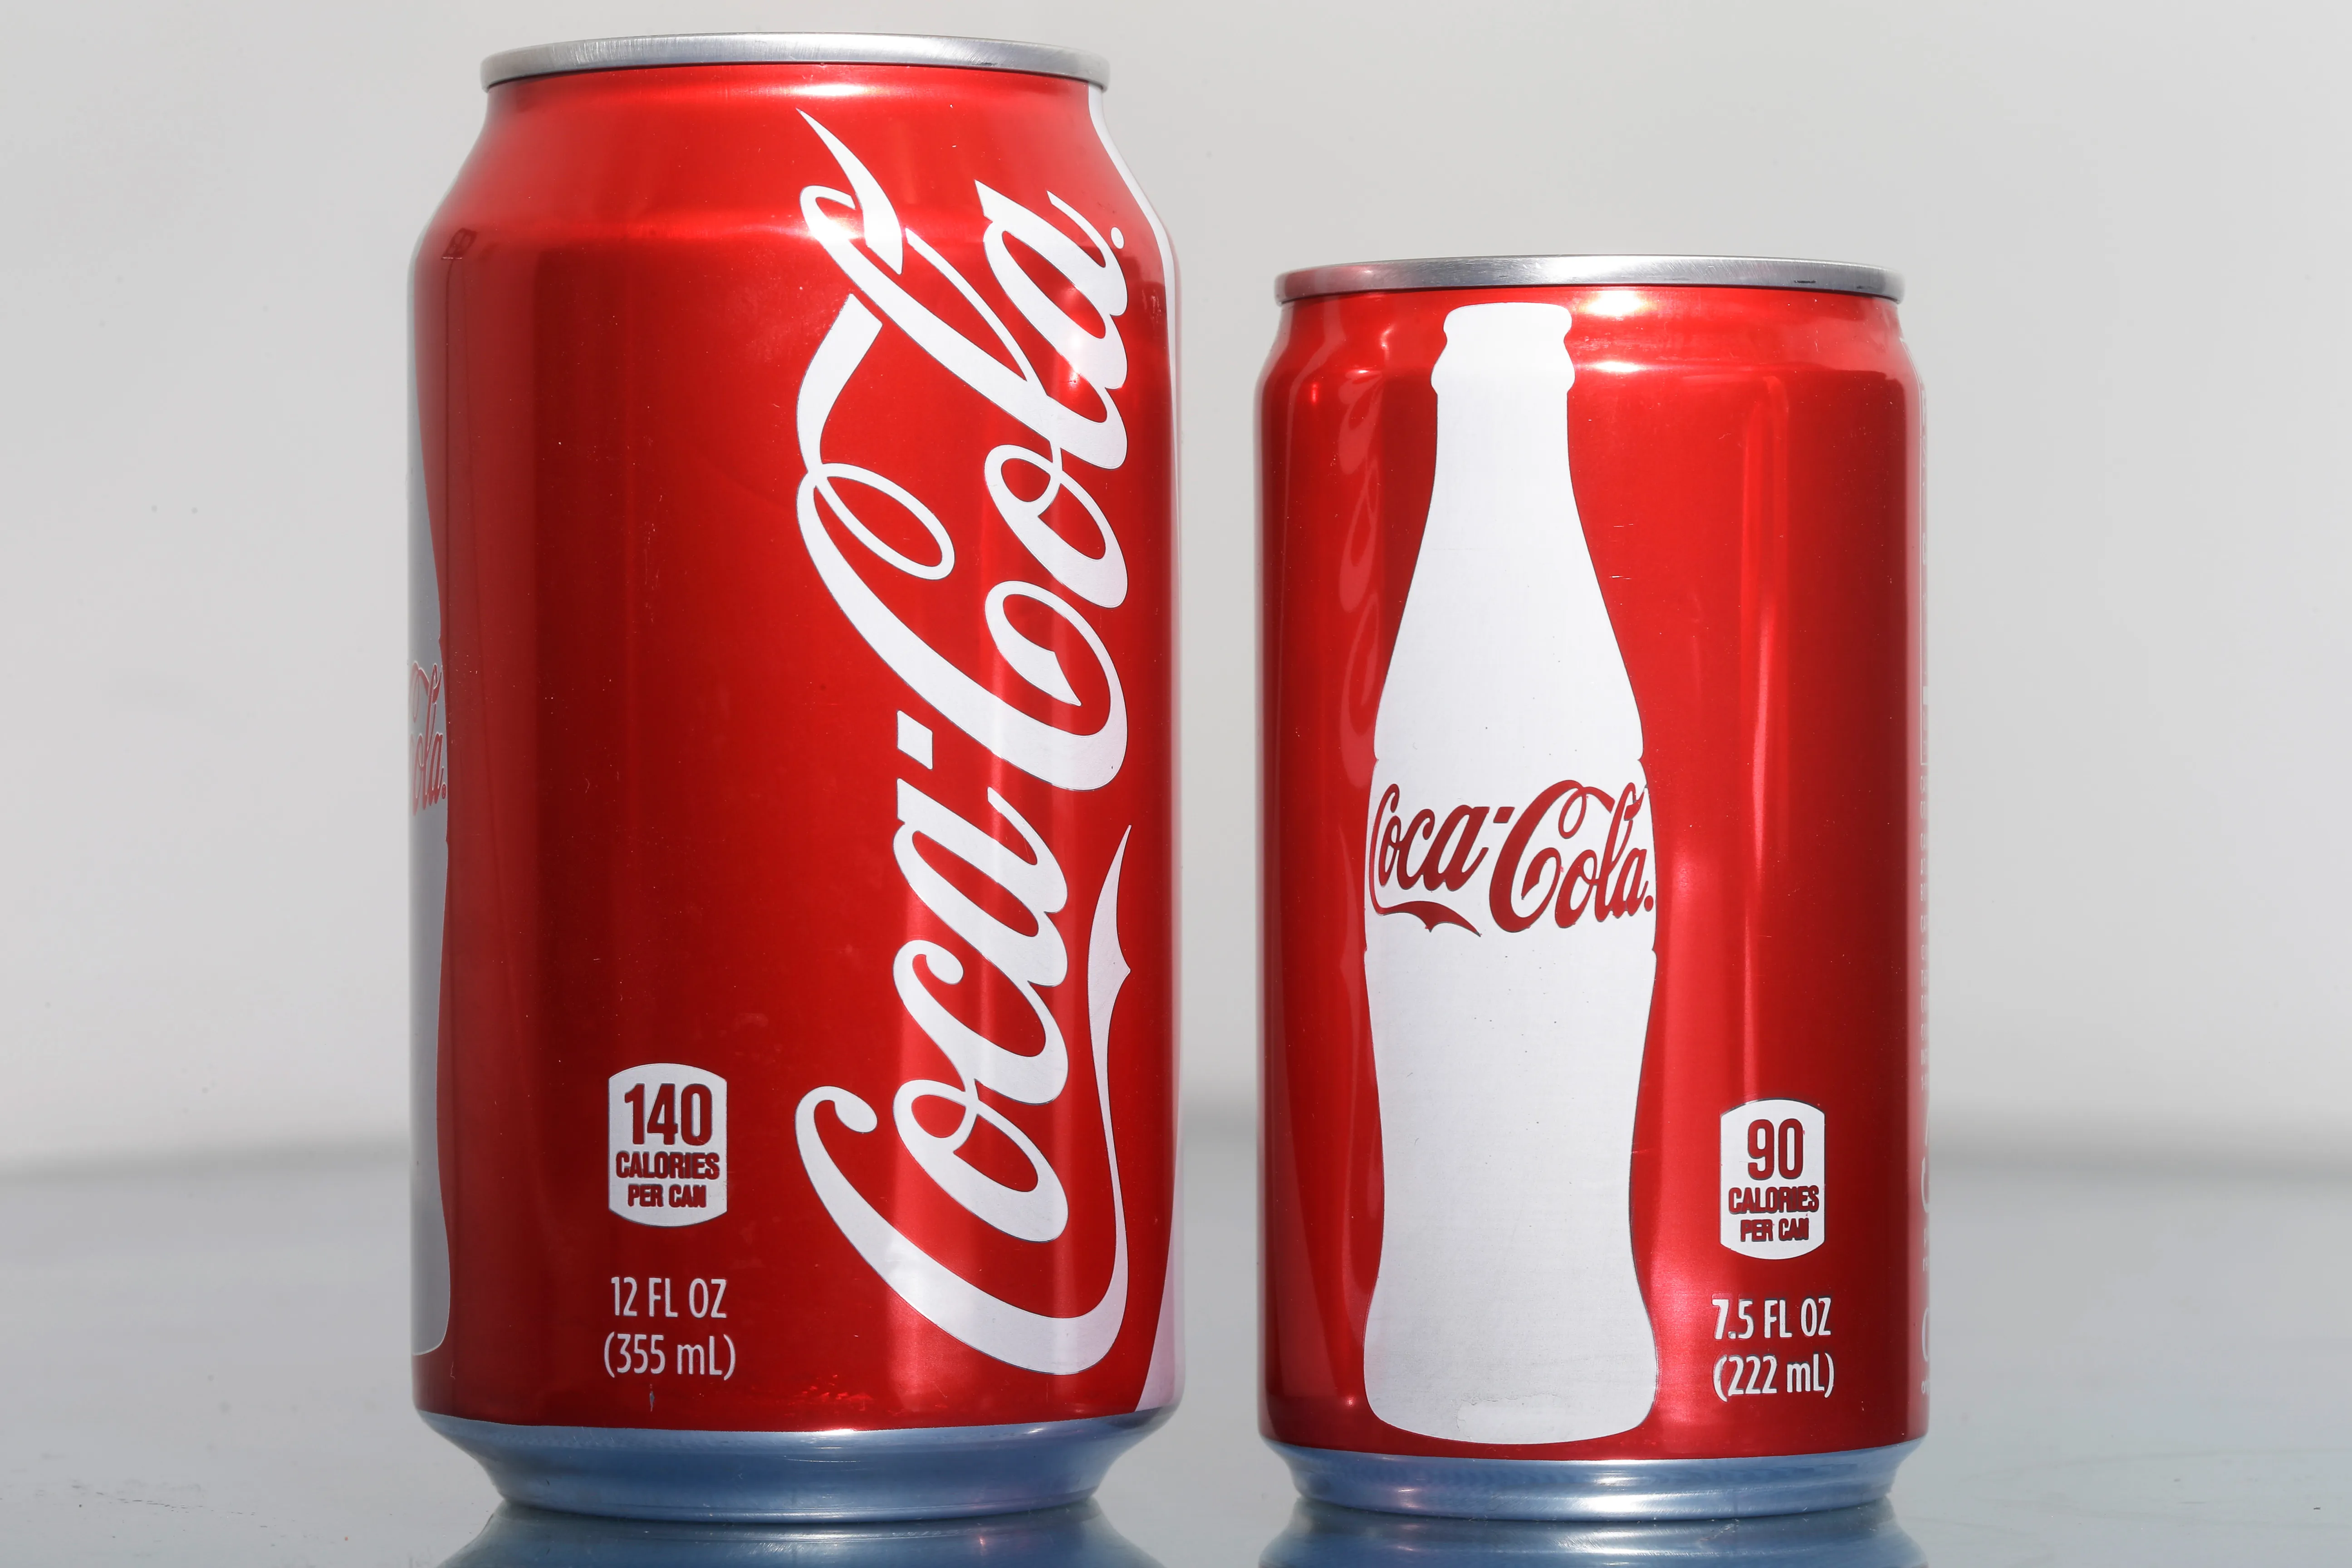 Coke's Mini Cans Provide Less Soda at Higher Prices